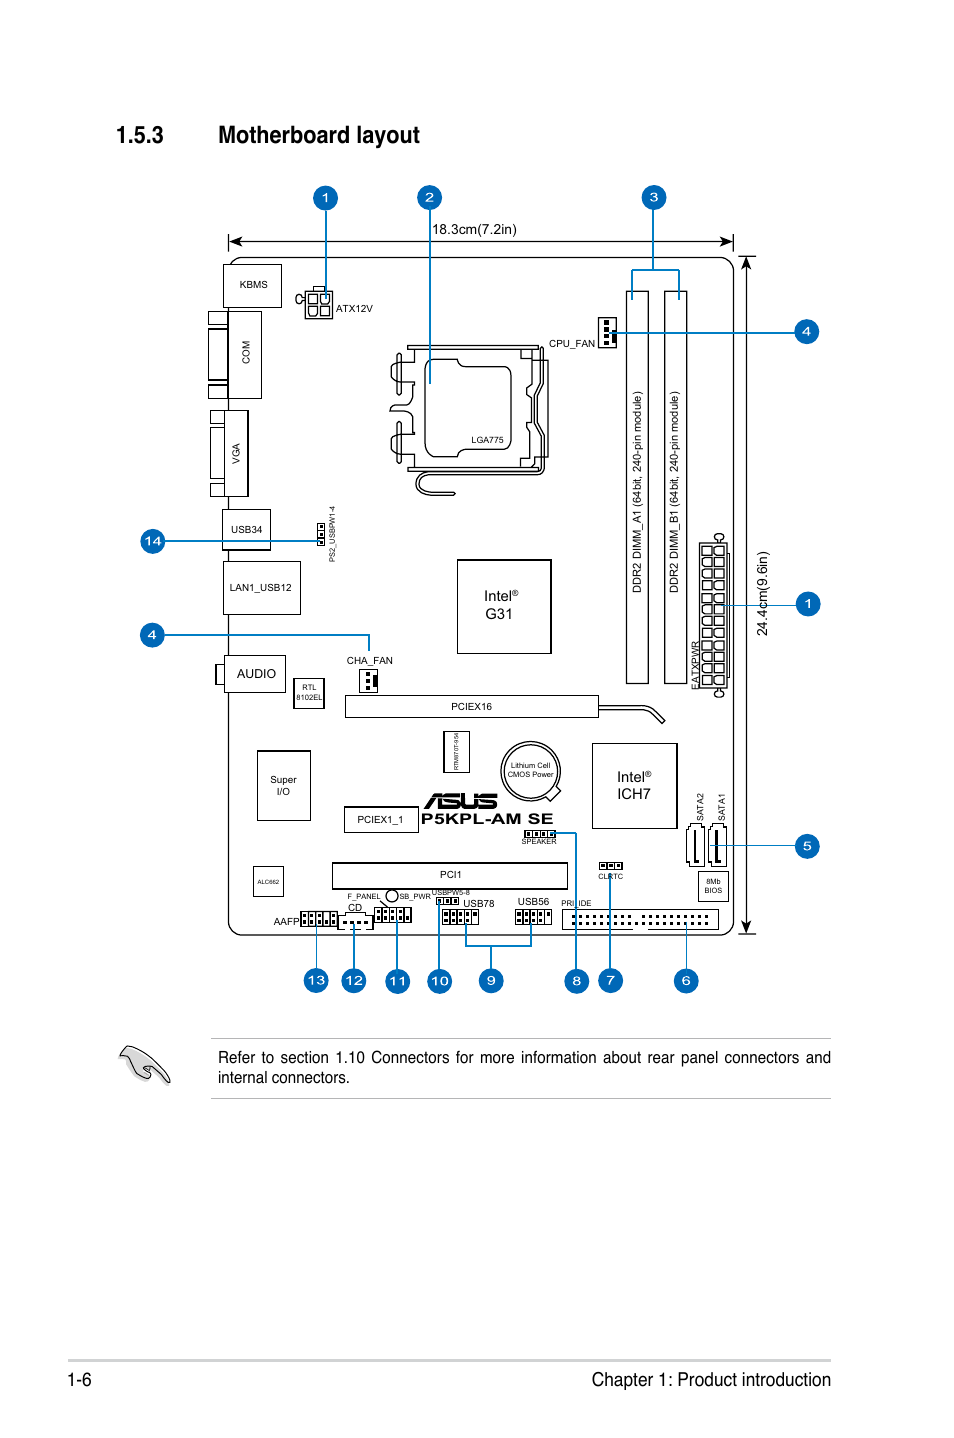 3 motherboard layout, 6 chapter 1: product introduction, P5kpl-am se